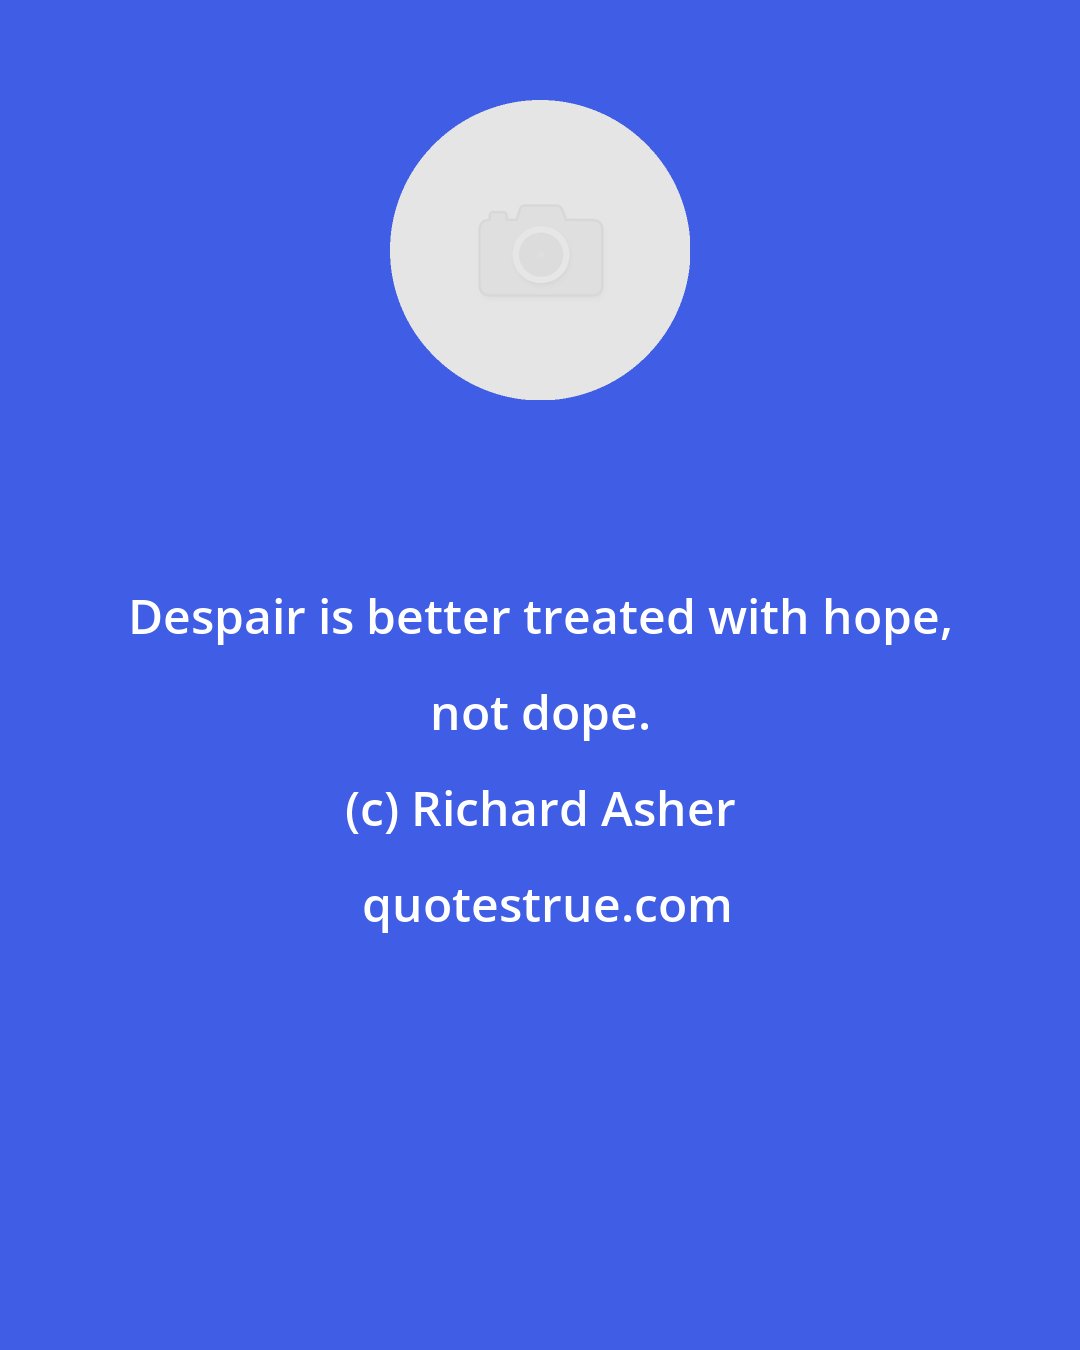 Richard Asher: Despair is better treated with hope, not dope.